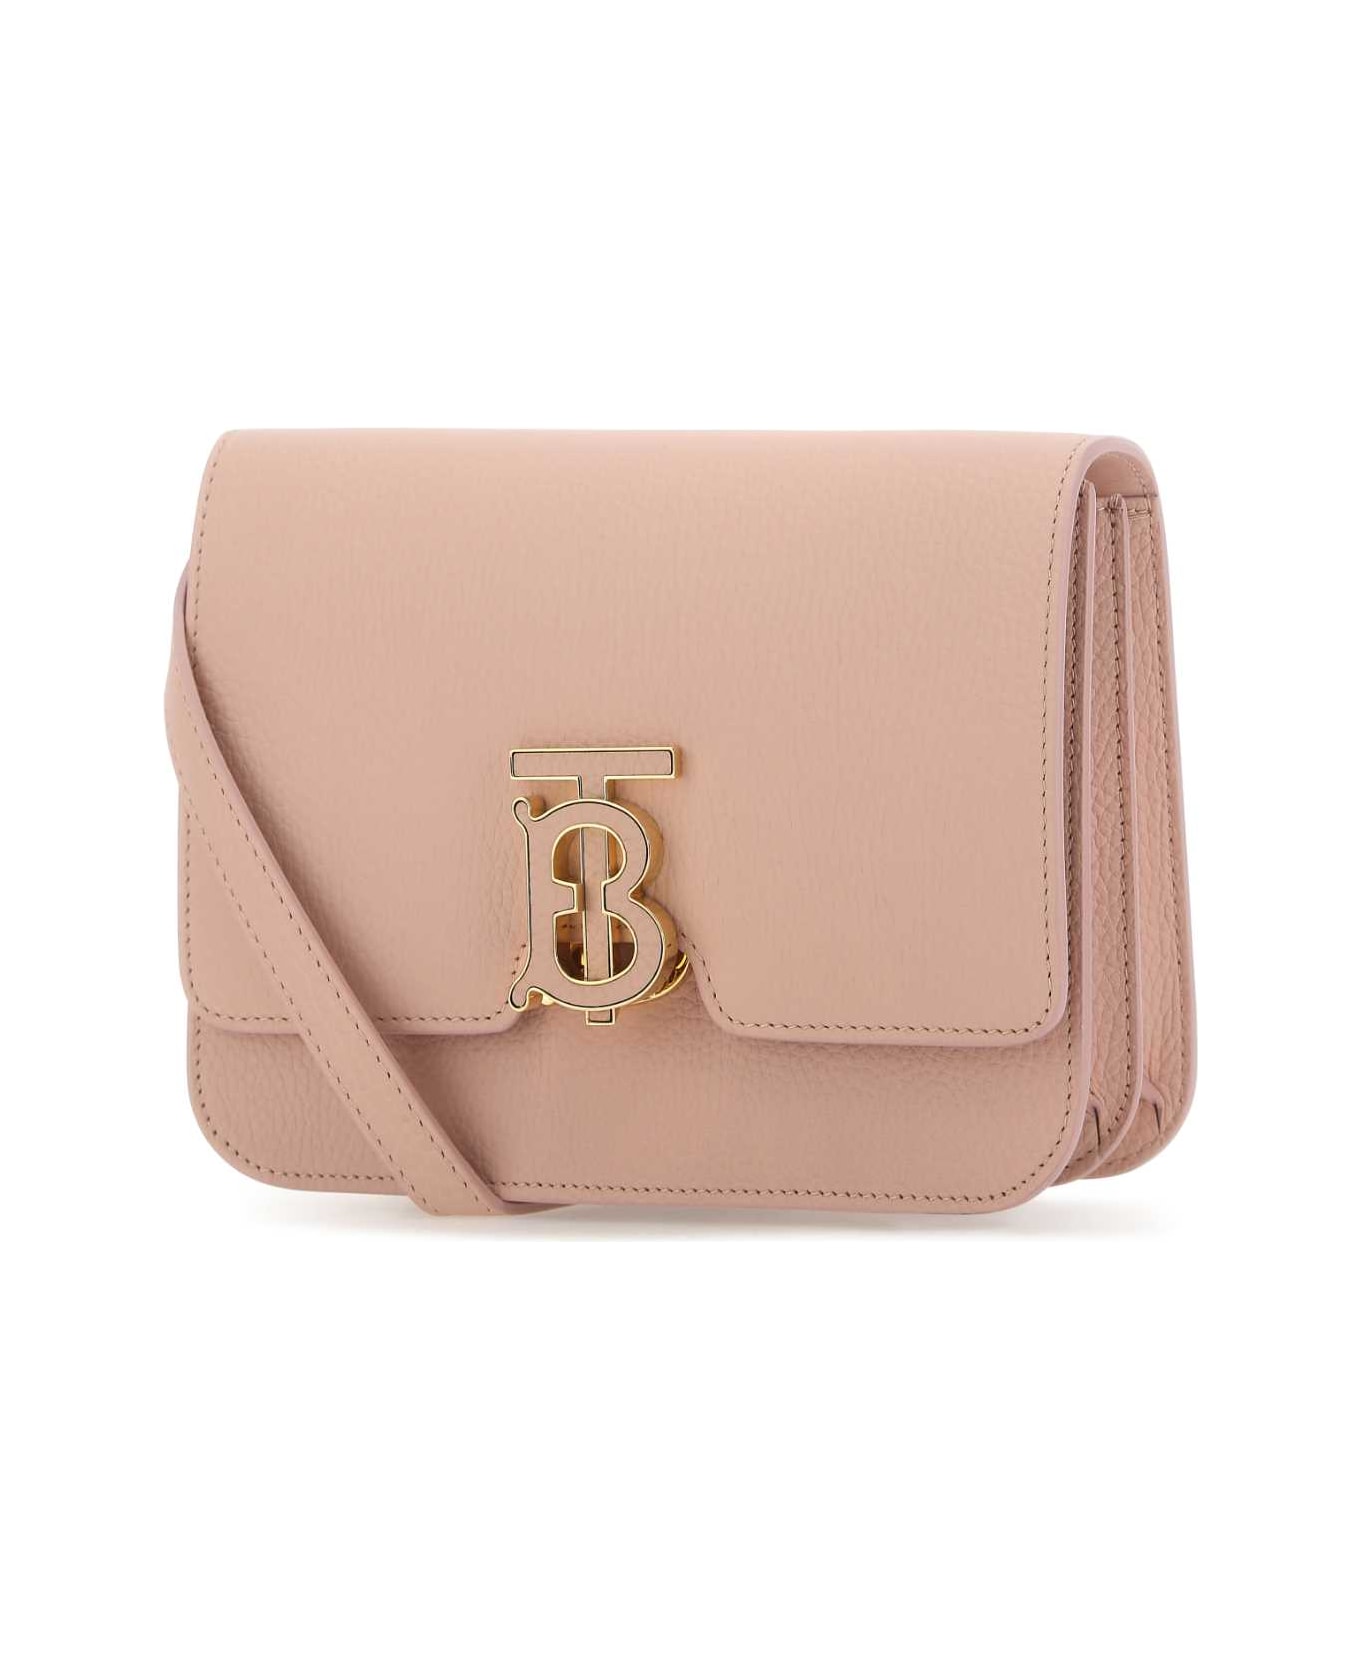 Burberry Pink Leather Small Tb Crossbody Bag - A3661 ショルダーバッグ